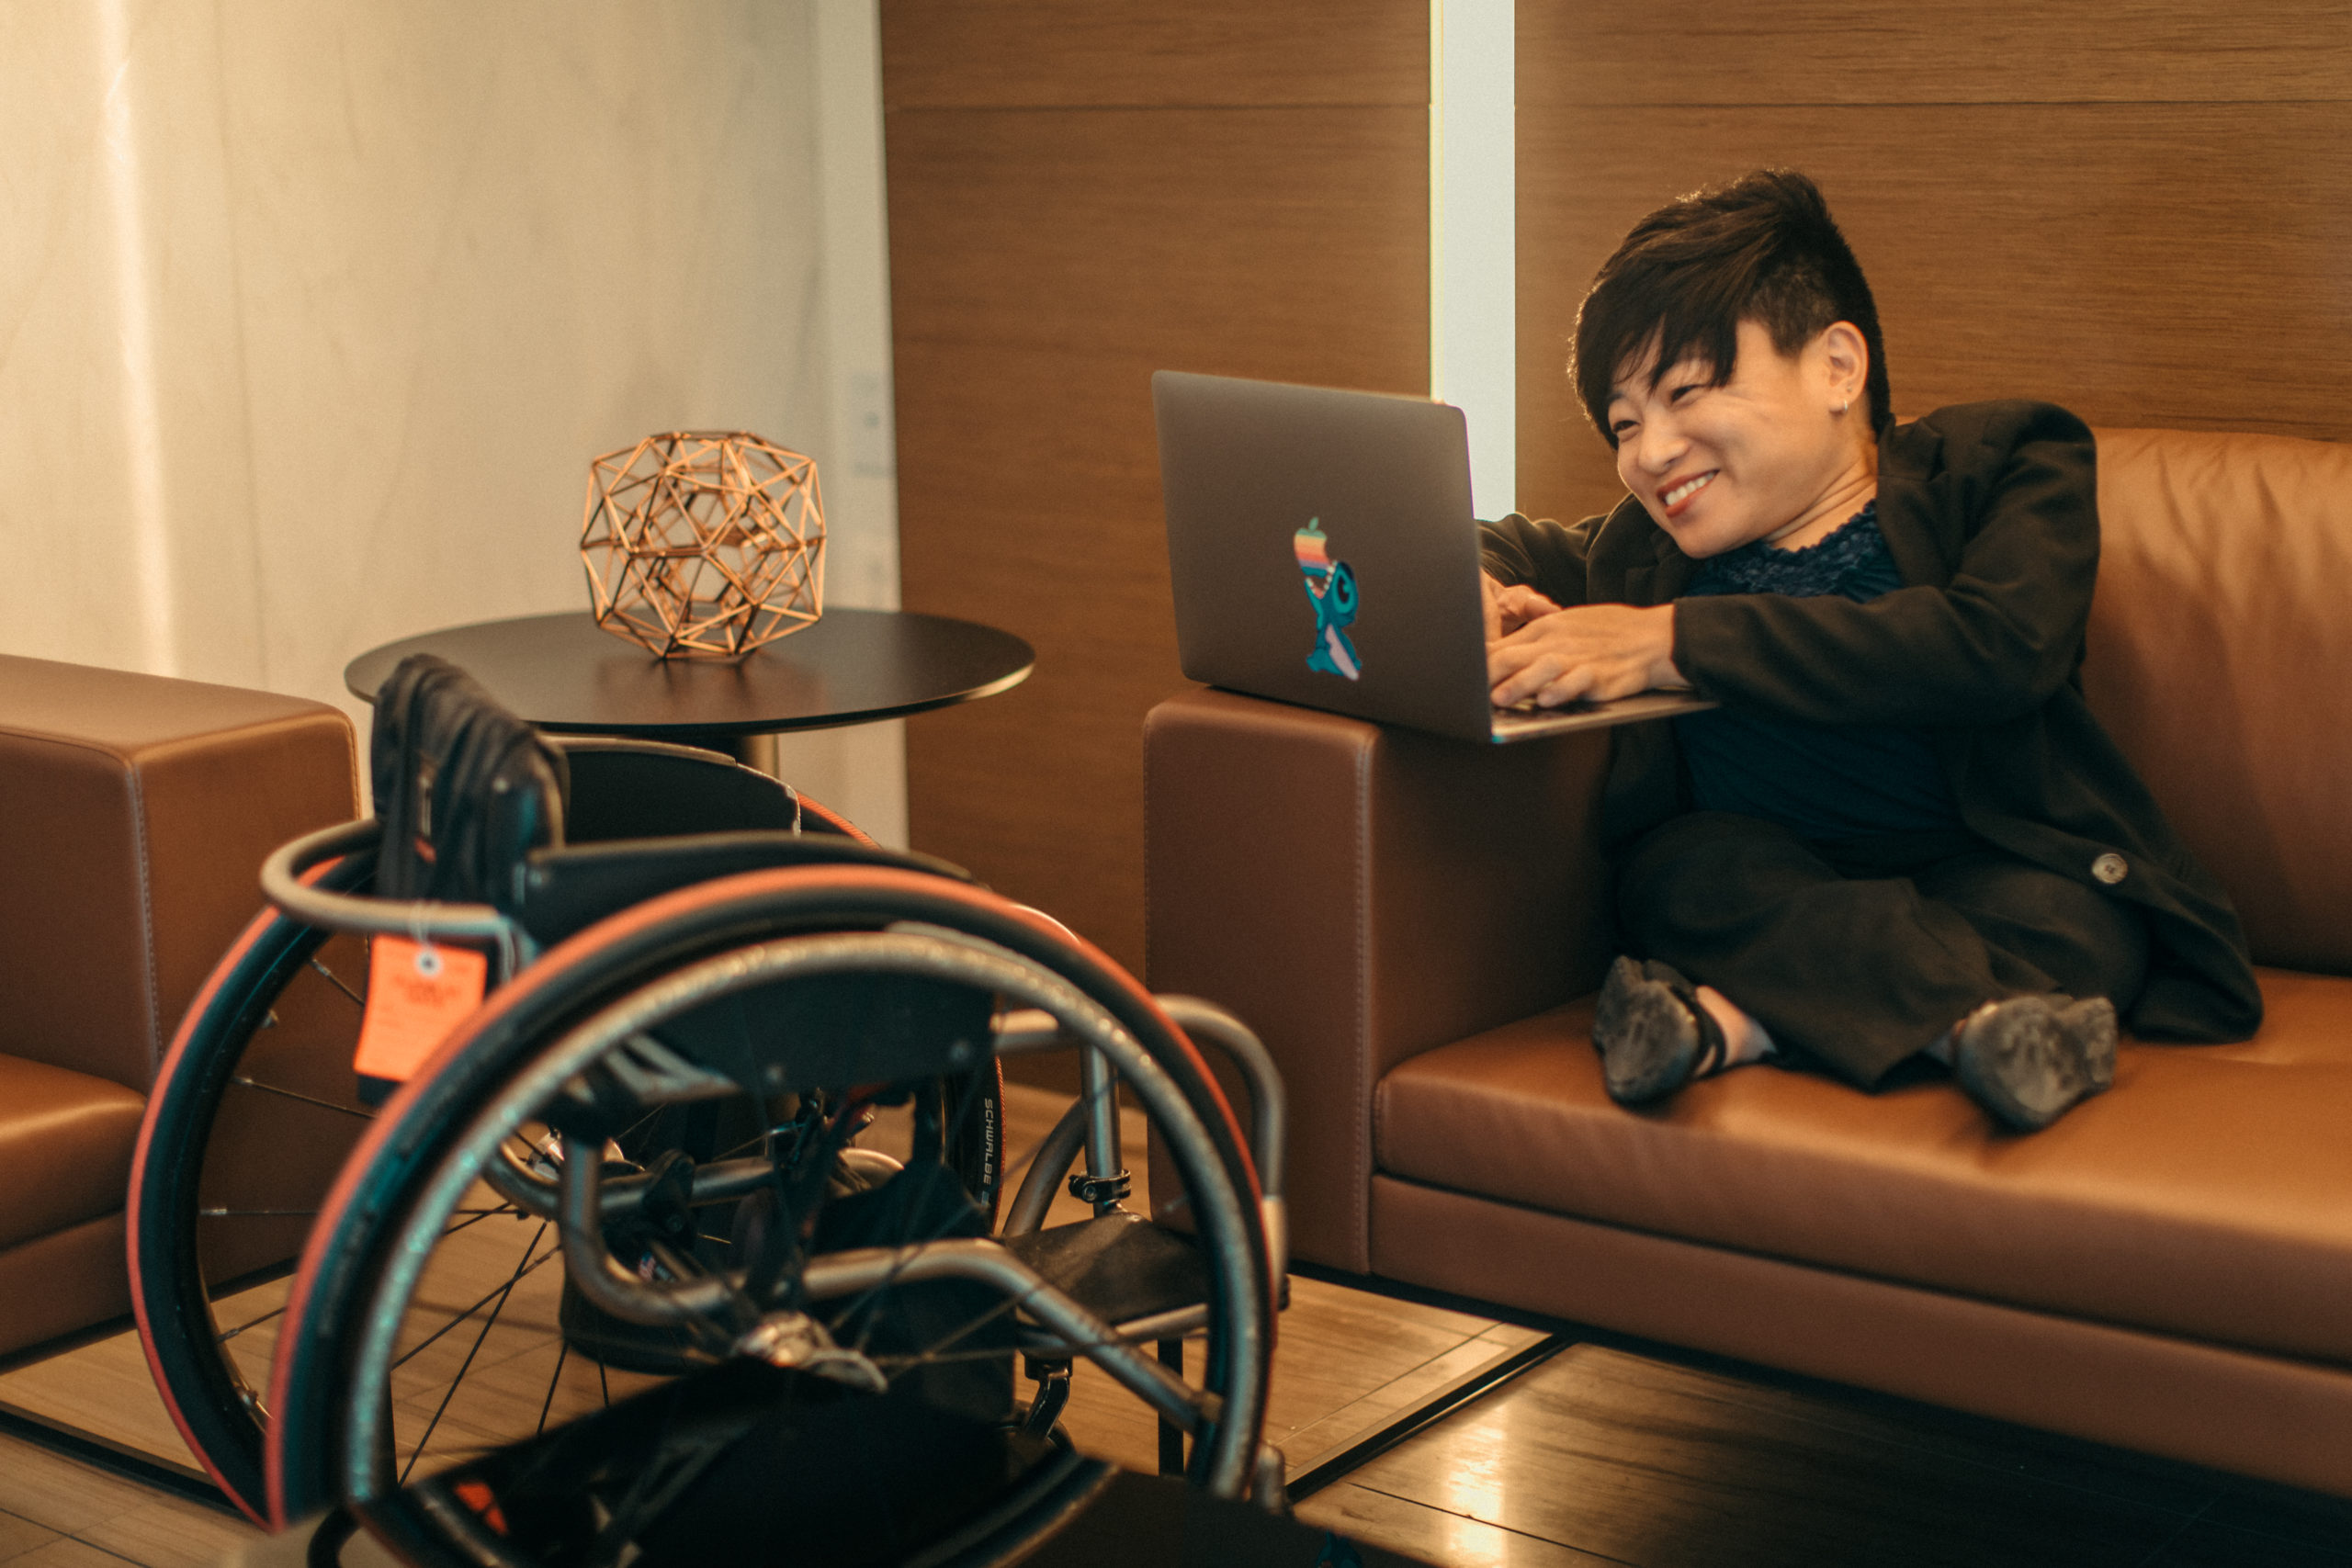 Woman sits on couch working on laptop with wheelchair across from her. She is smiling and is in a corporate setting/lounge.